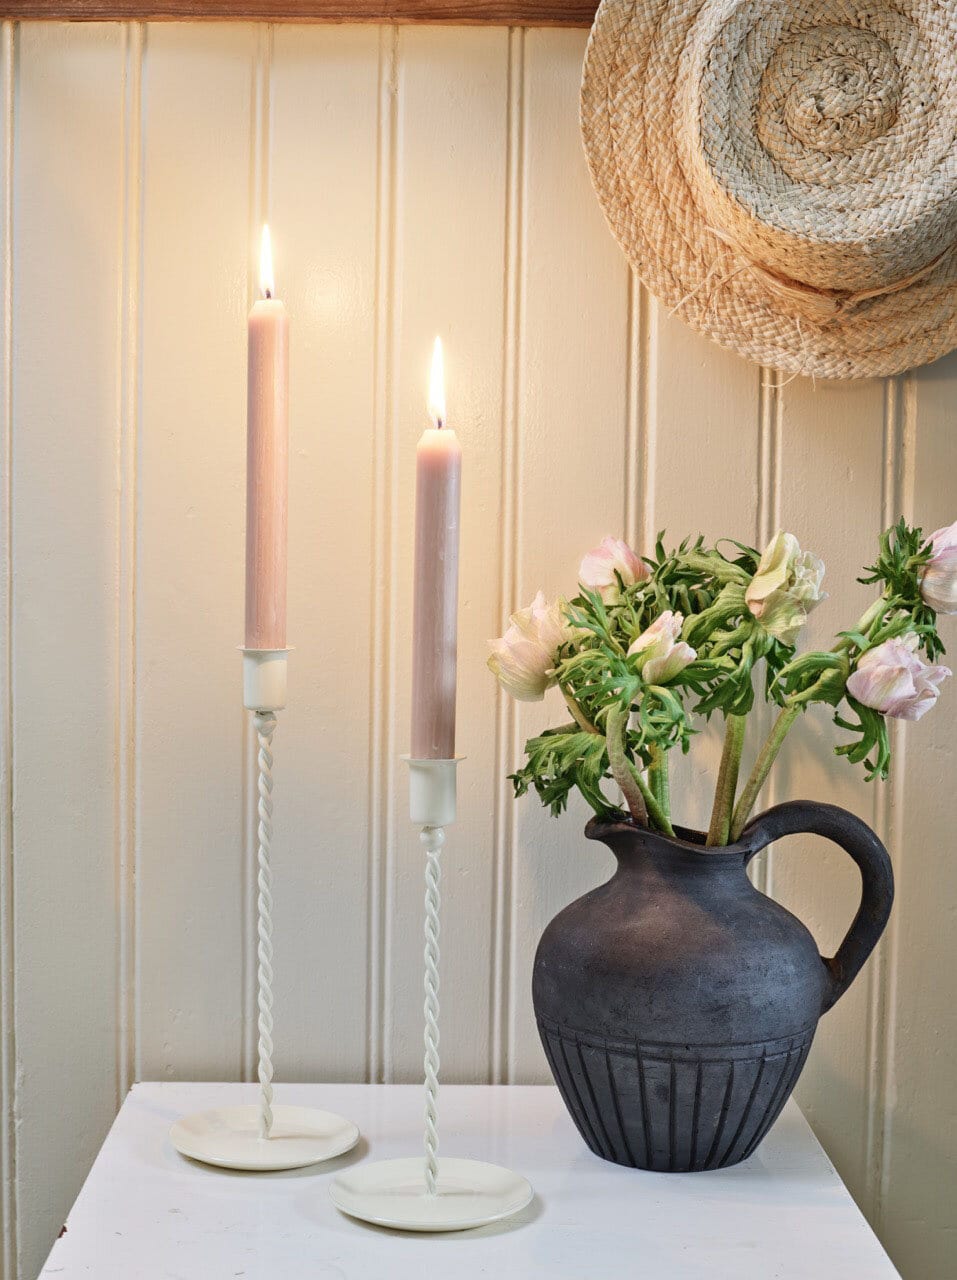 Candle Holder Estelle Off White Low